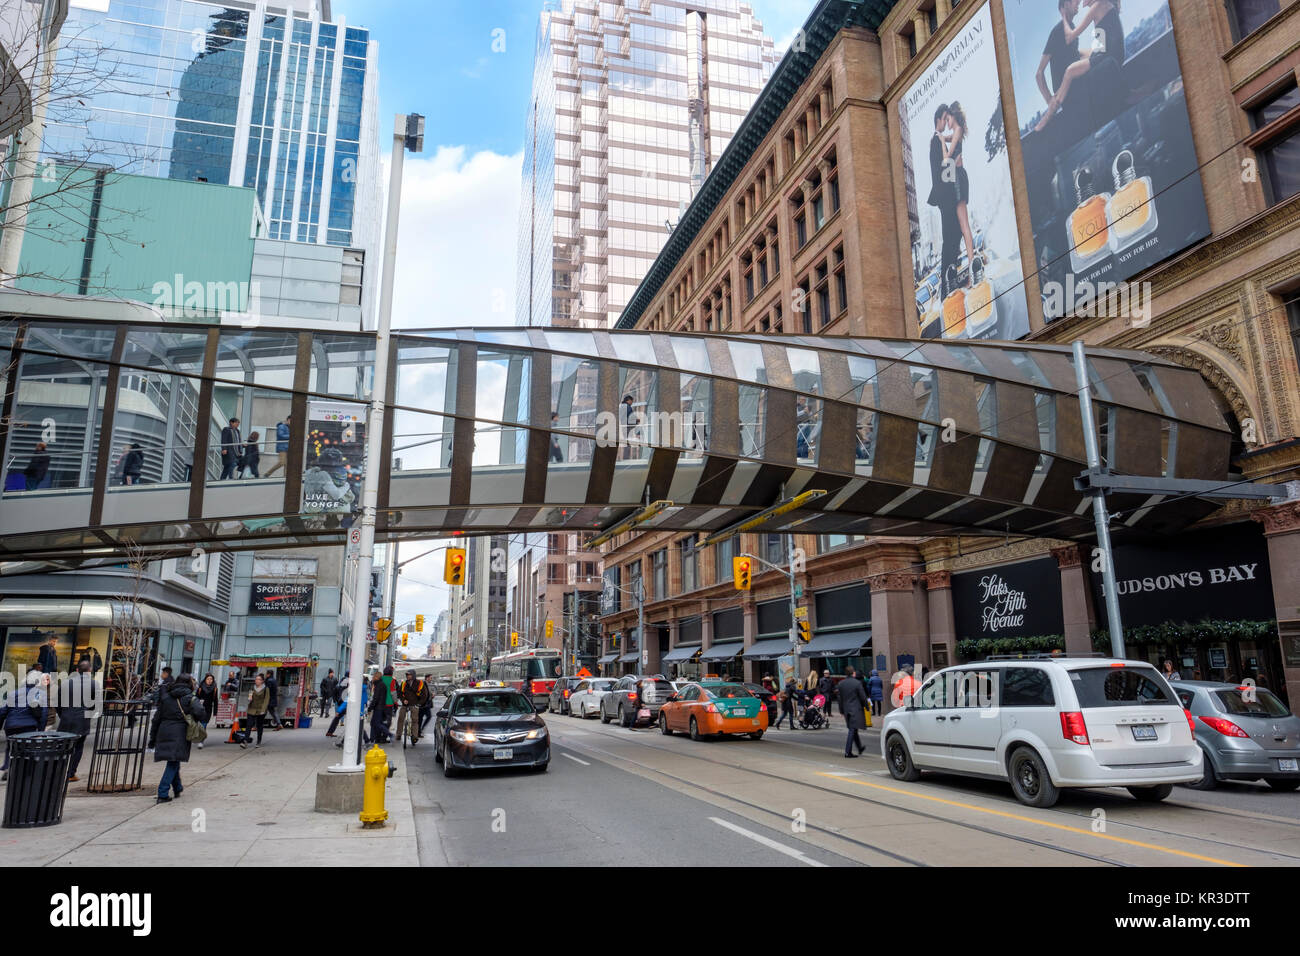 Pedway, elevated pedestrian walkway linking Toronto Eaton Centre shopping center and Saks Fifth Avenue Toronto store, Queen Street West, Canada. Stock Photo